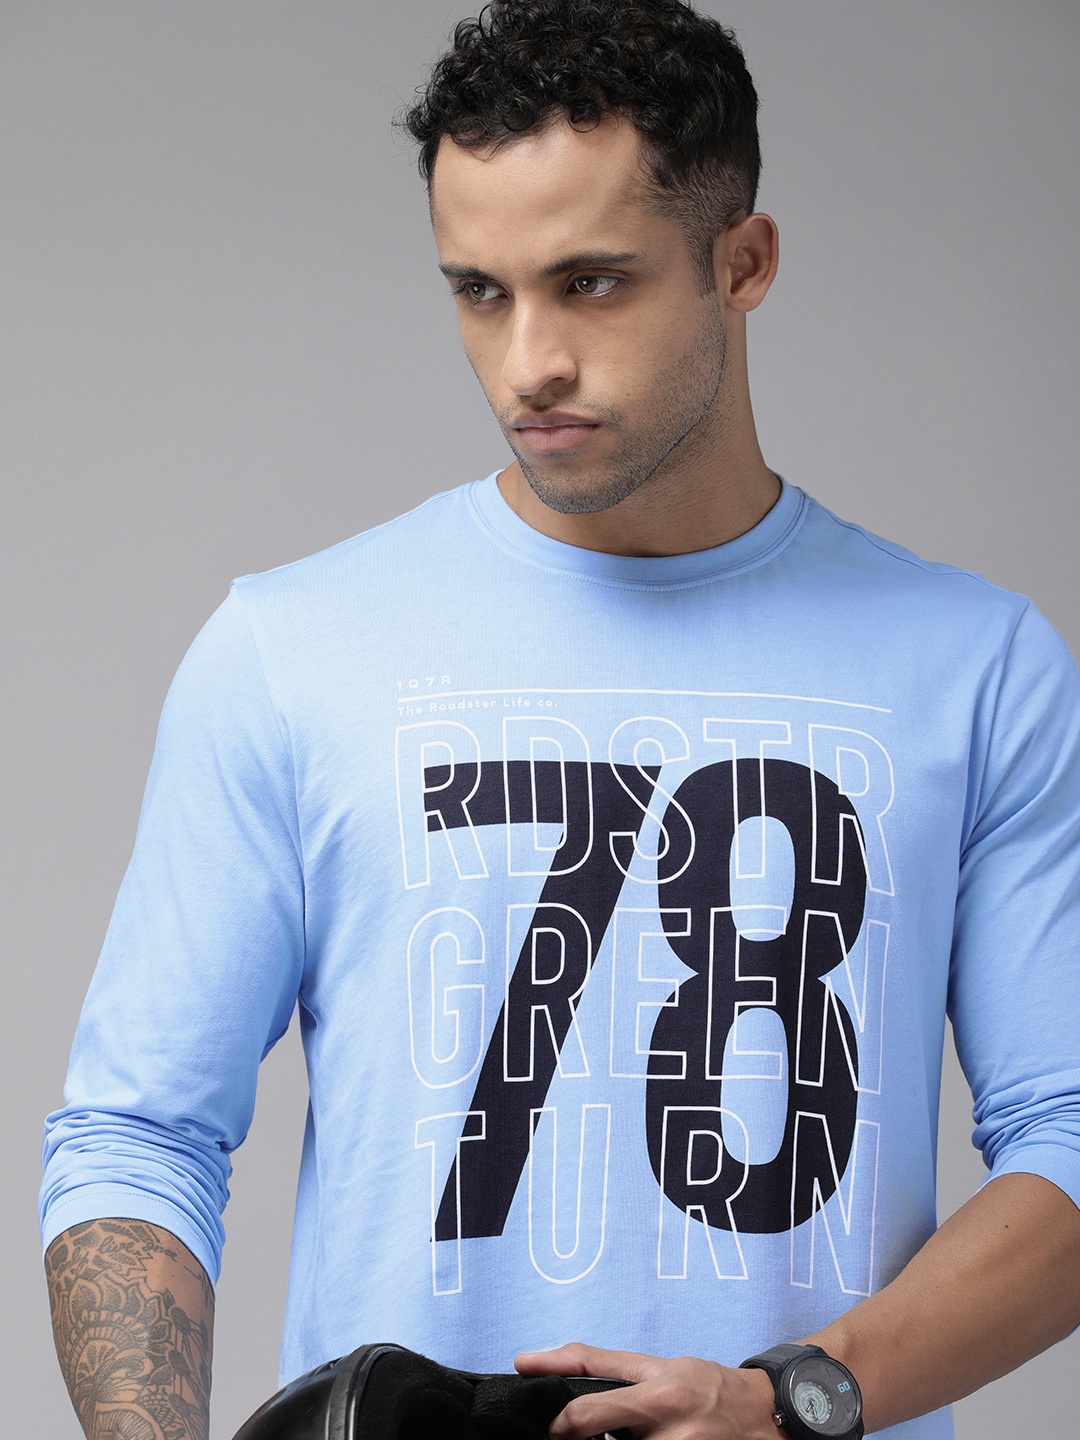 

Roadster Men Blue Typography Printed Pure Cotton T-shirt